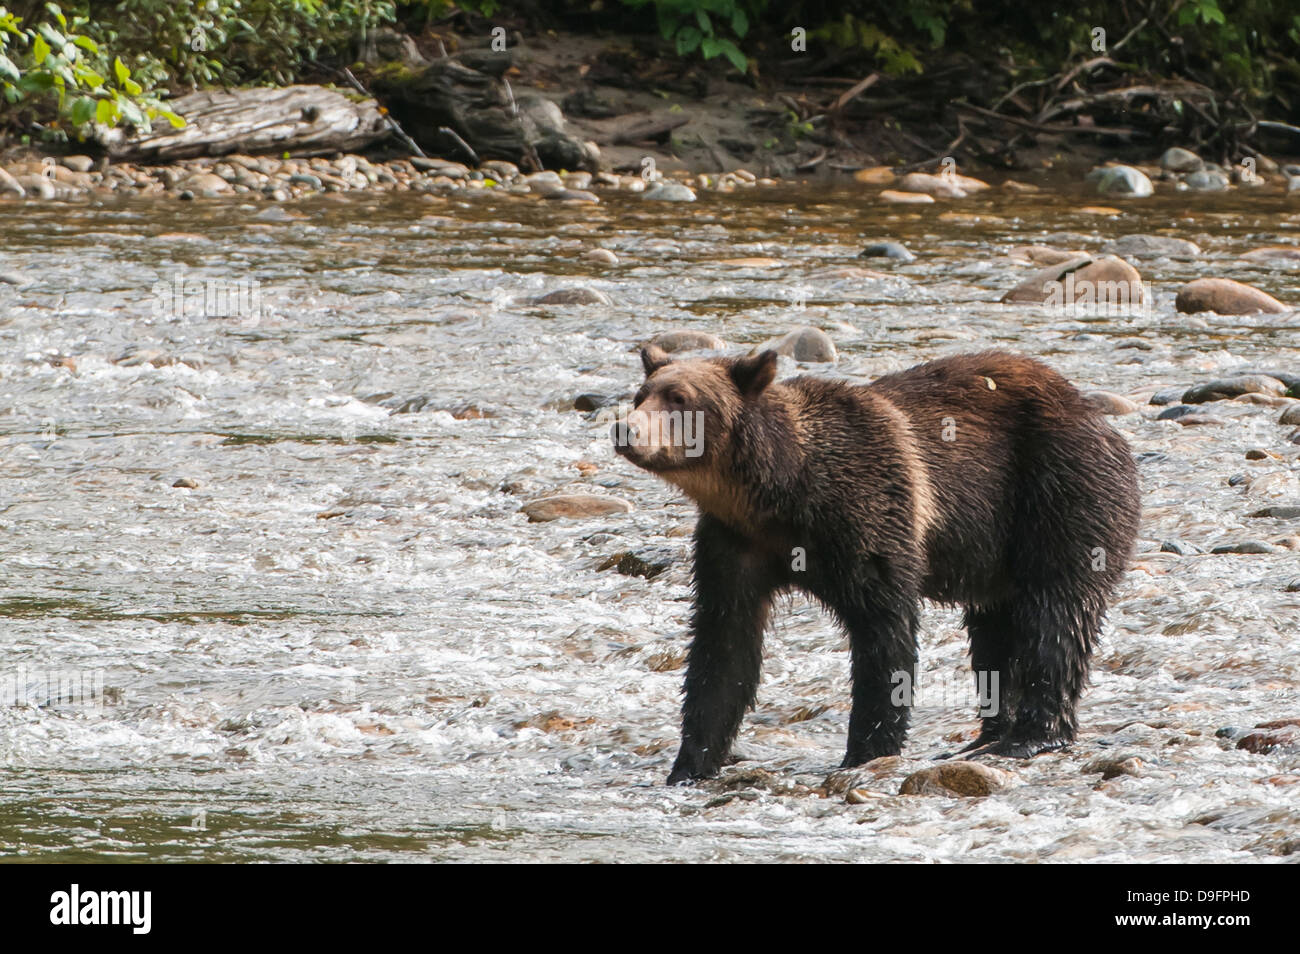 Brown or grizzly bear (Ursus arctos) fishing for salmon in Great Bear Rainforest, British Columbia, Canada Stock Photo